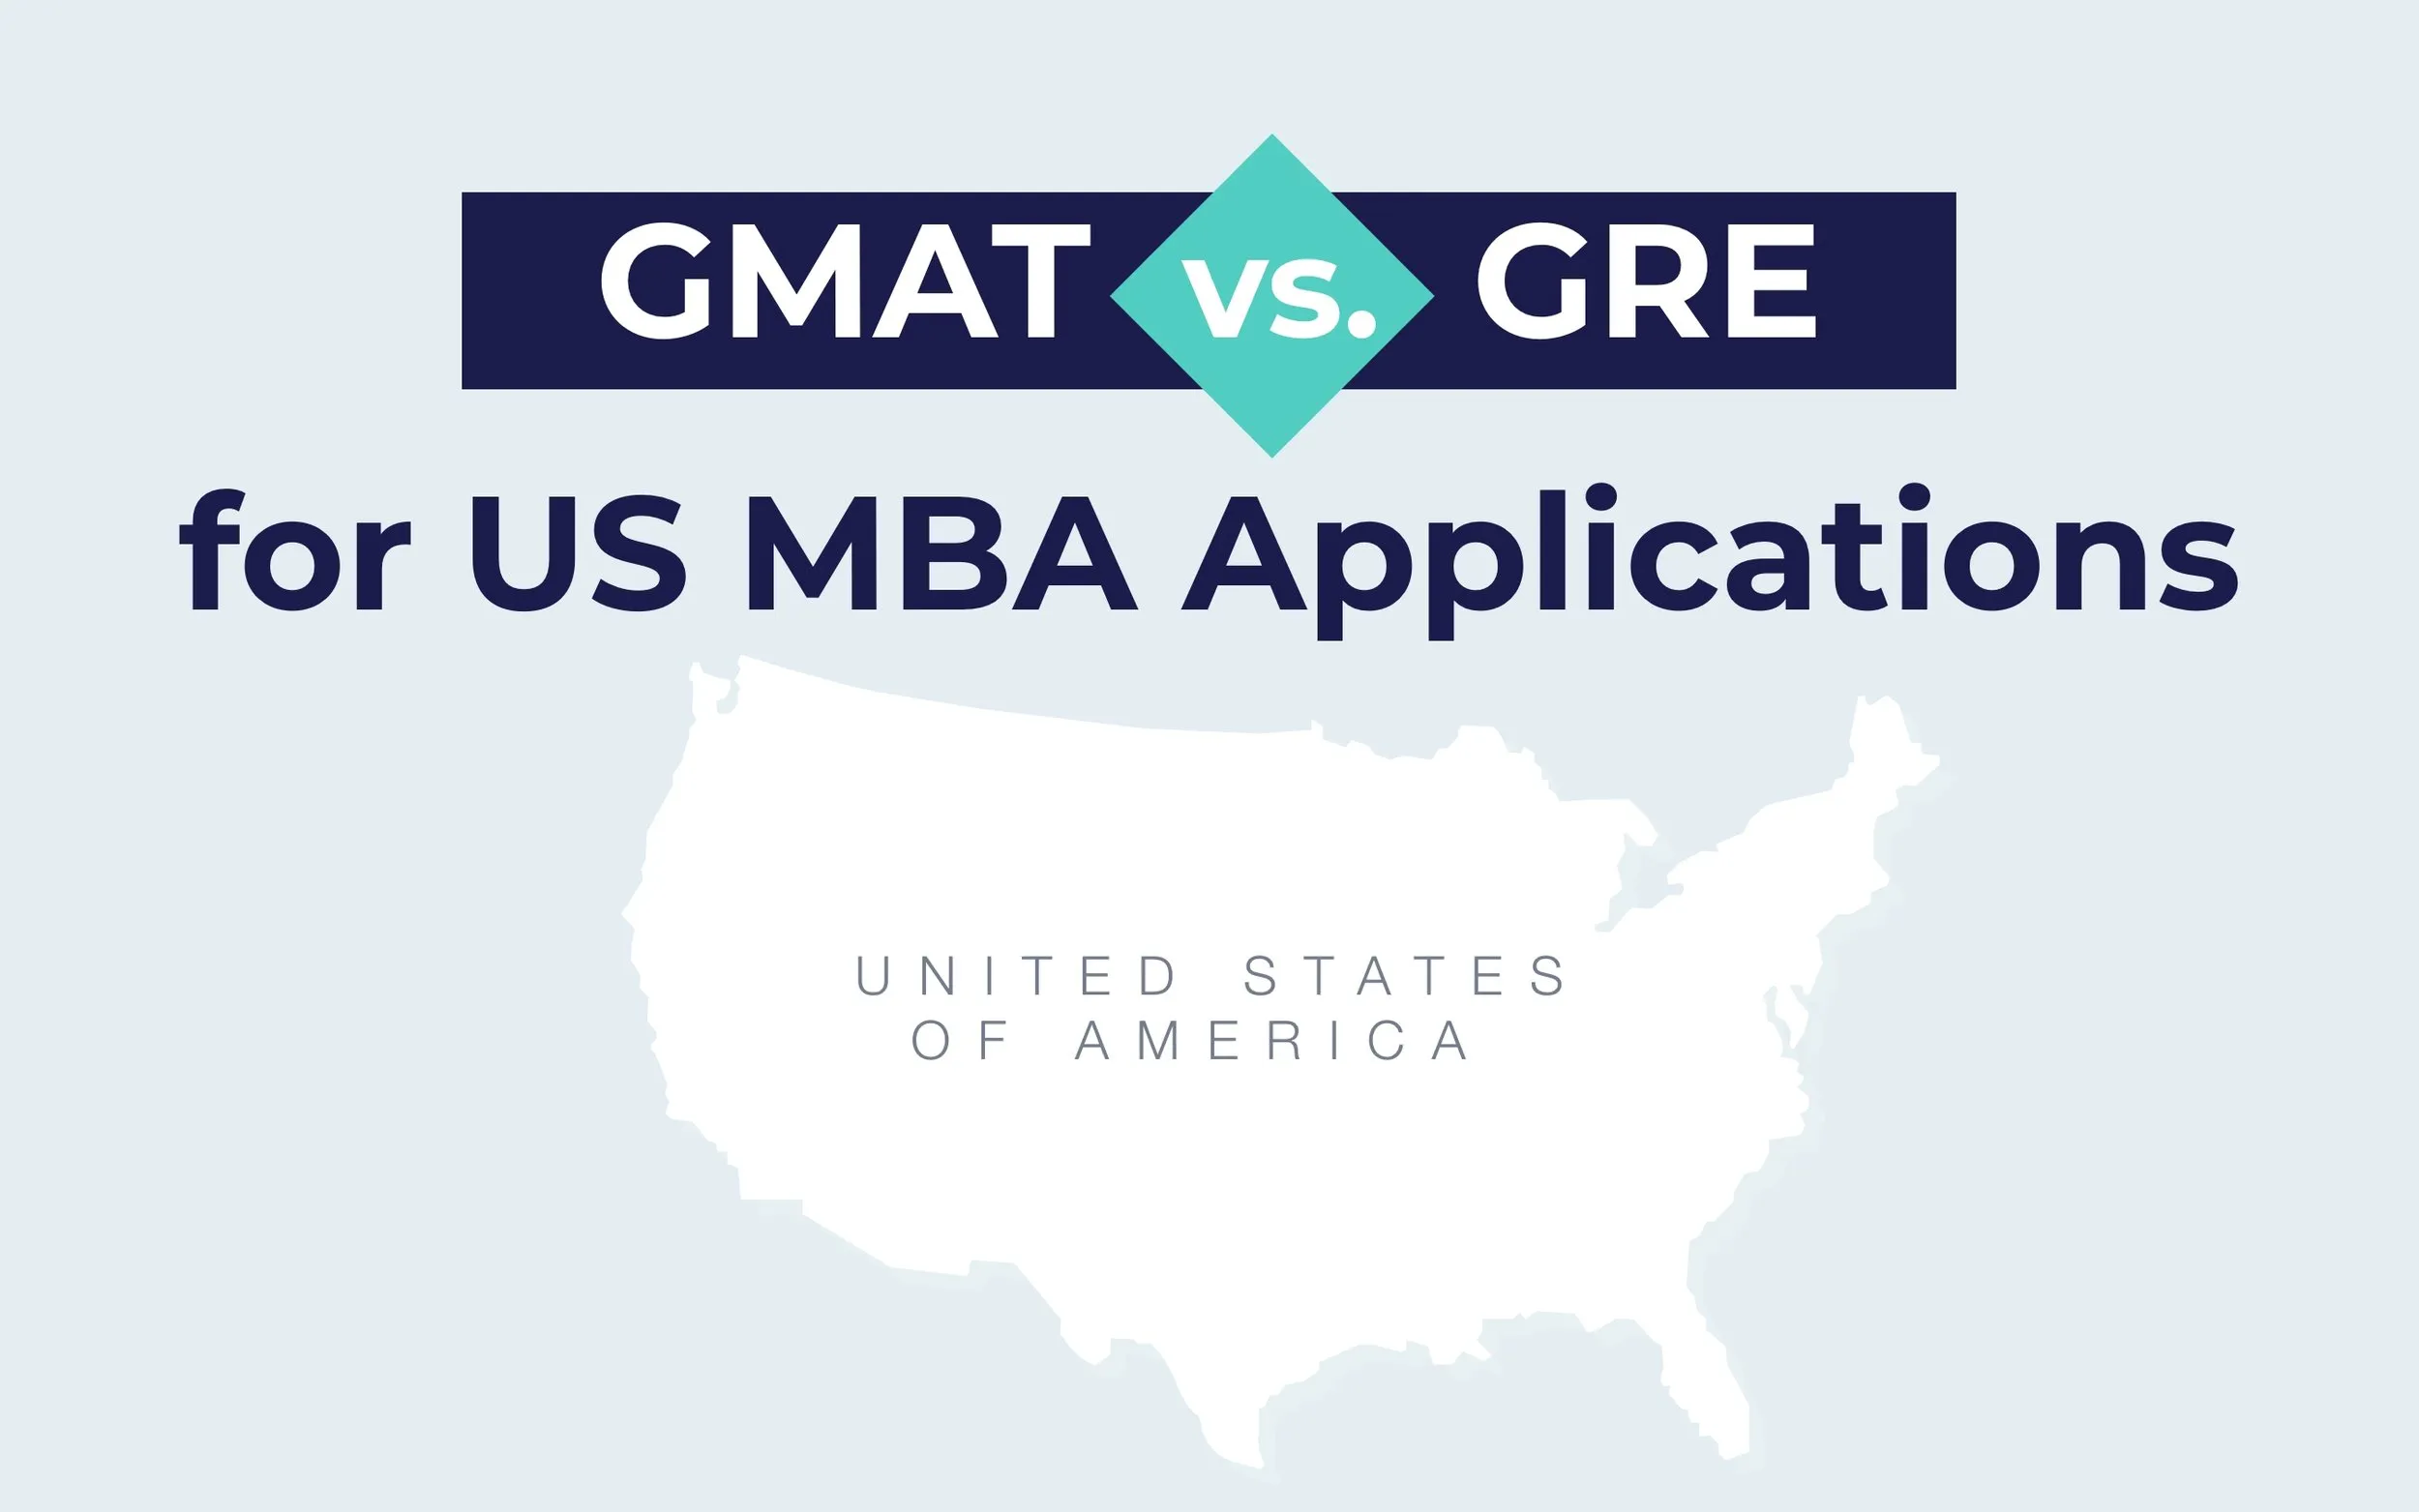 GMAT vs. GRE for US MBA Applications